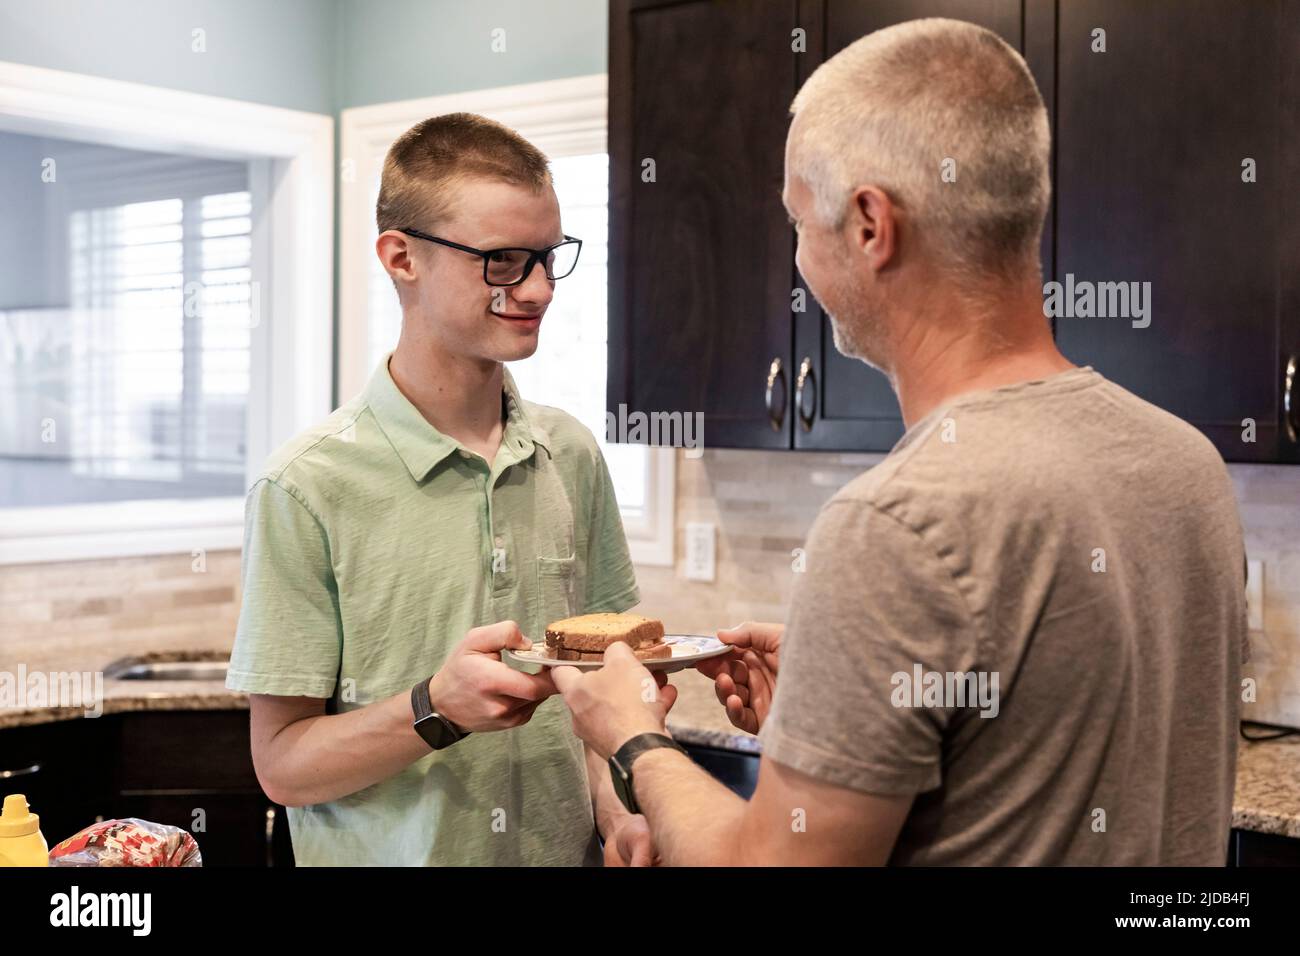 Young man serving his dad a sandwich in the kitchen at home; Edmonton, Alberta, Canada Stock Photo